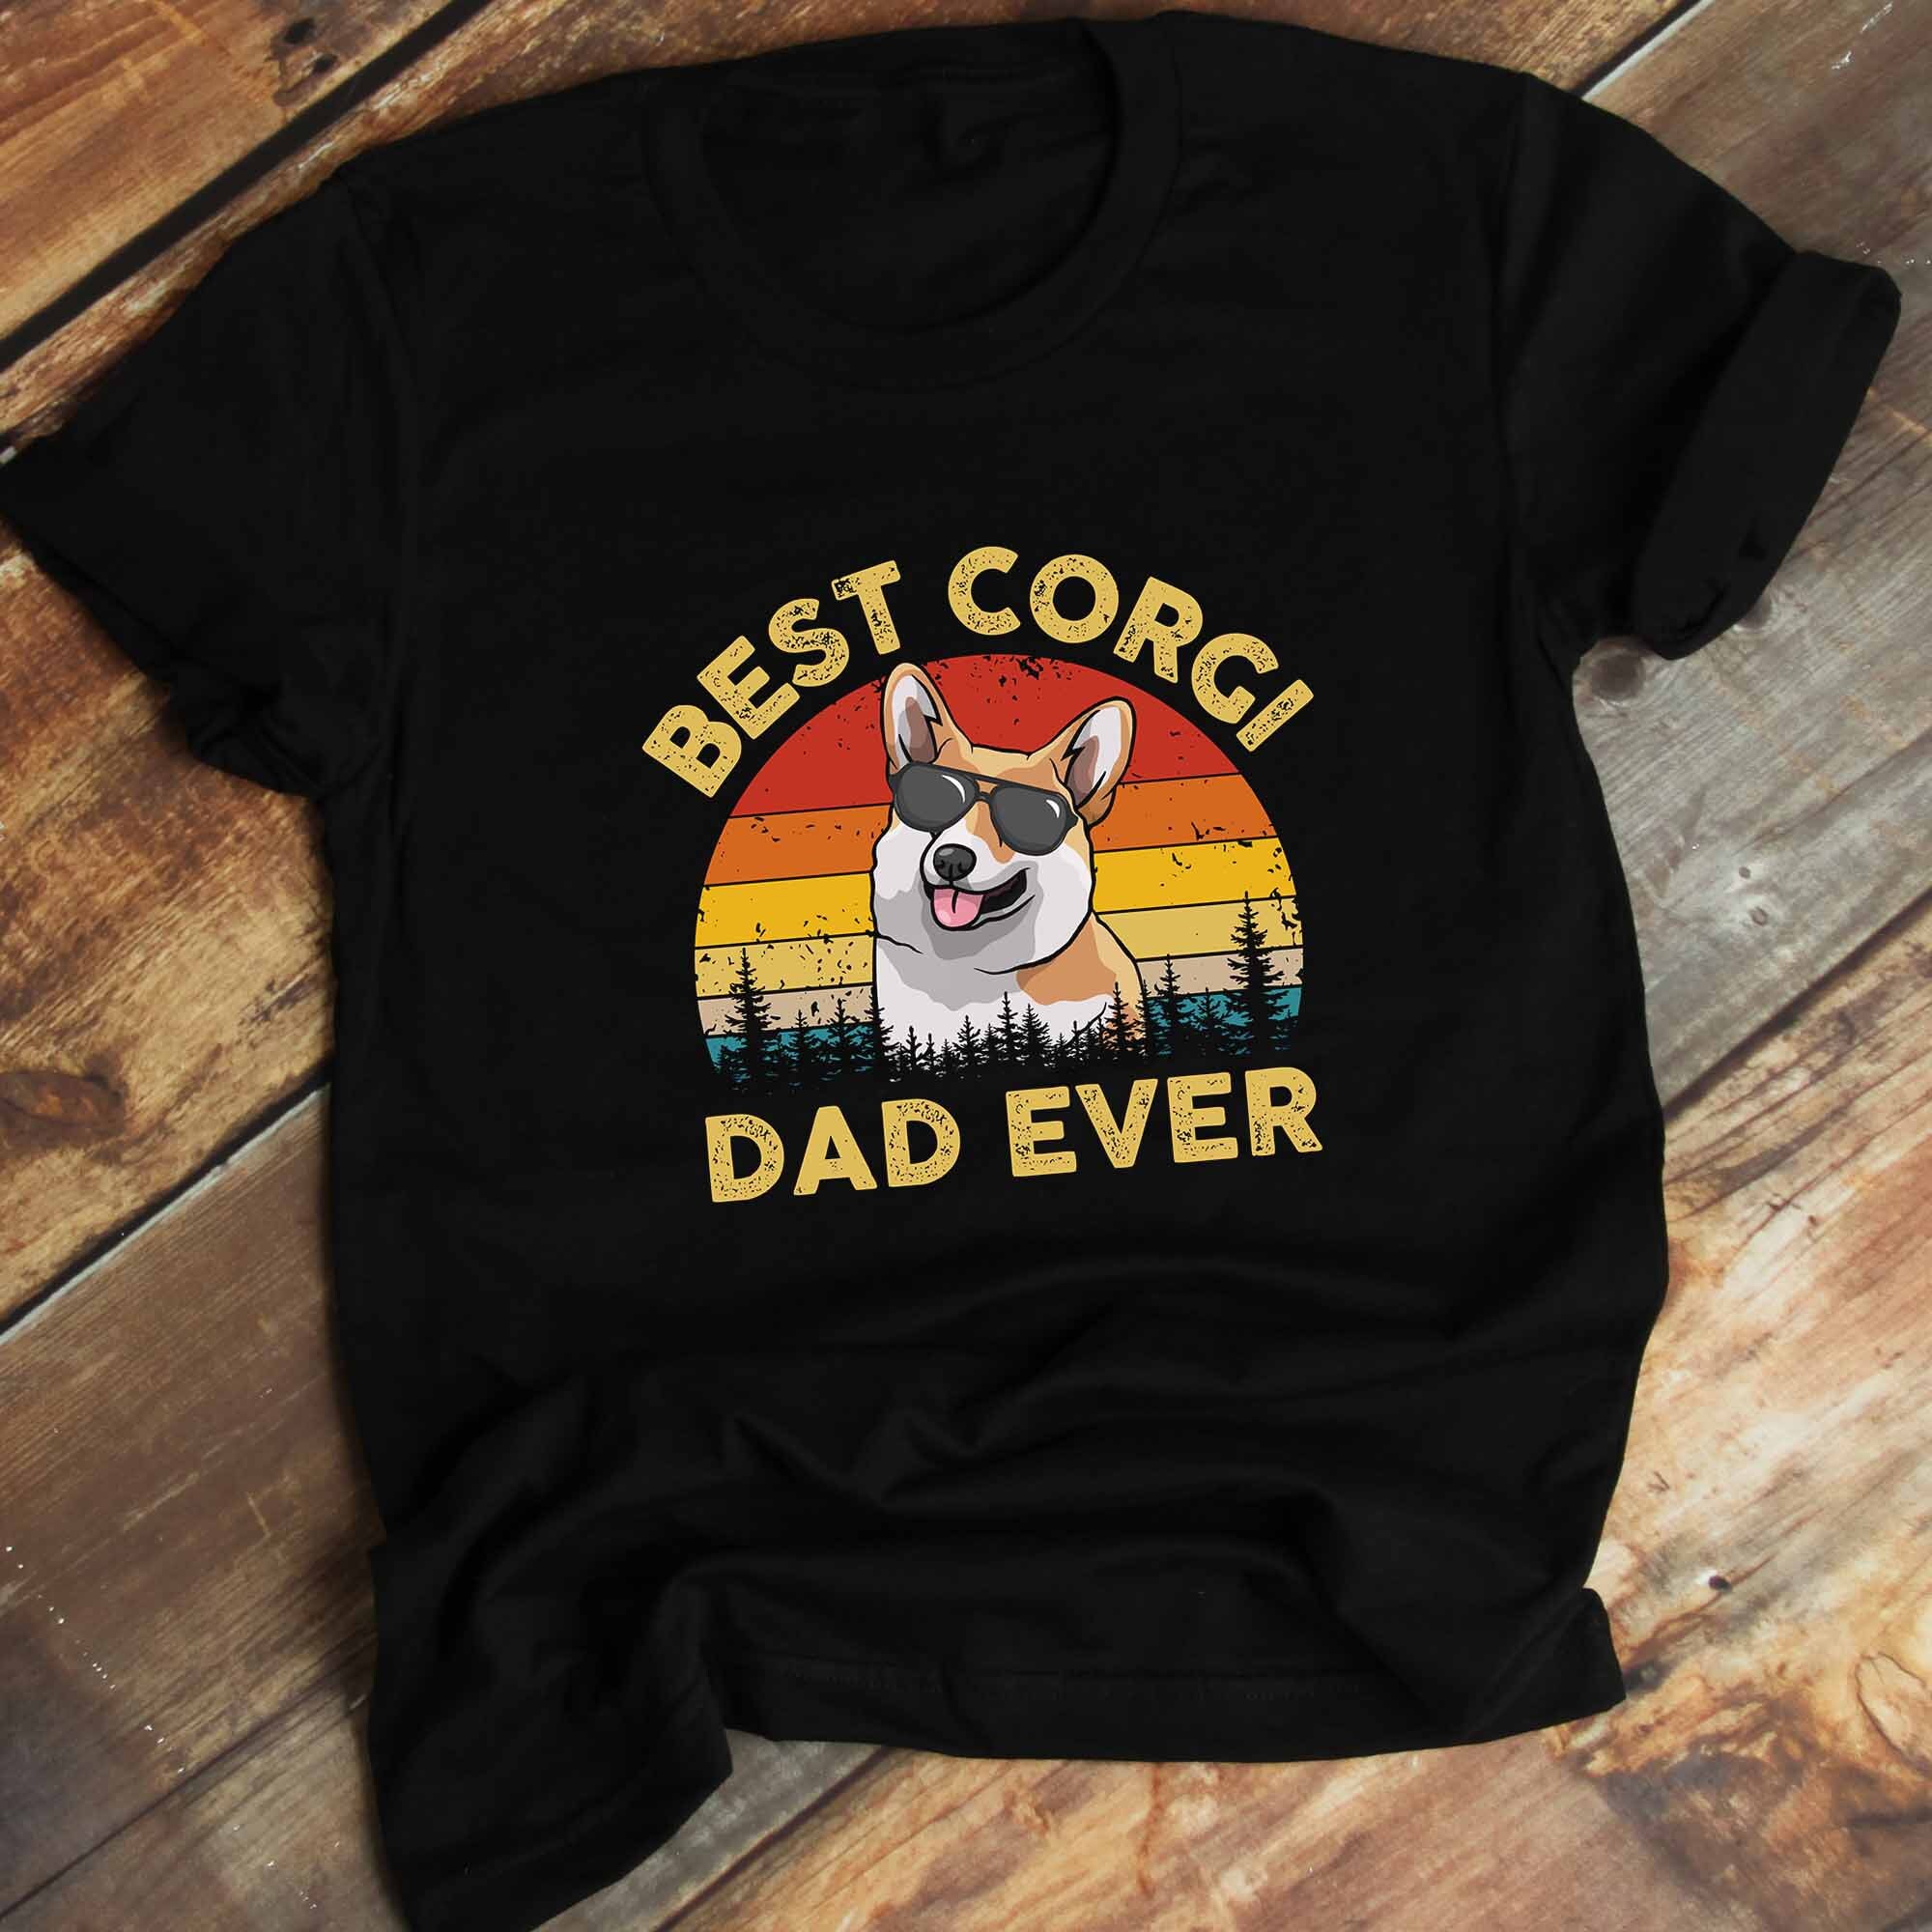 OWNED BY A CORGI T-SHIRT For Dog Lover Pet Owner Black Cotton Gift welsh 